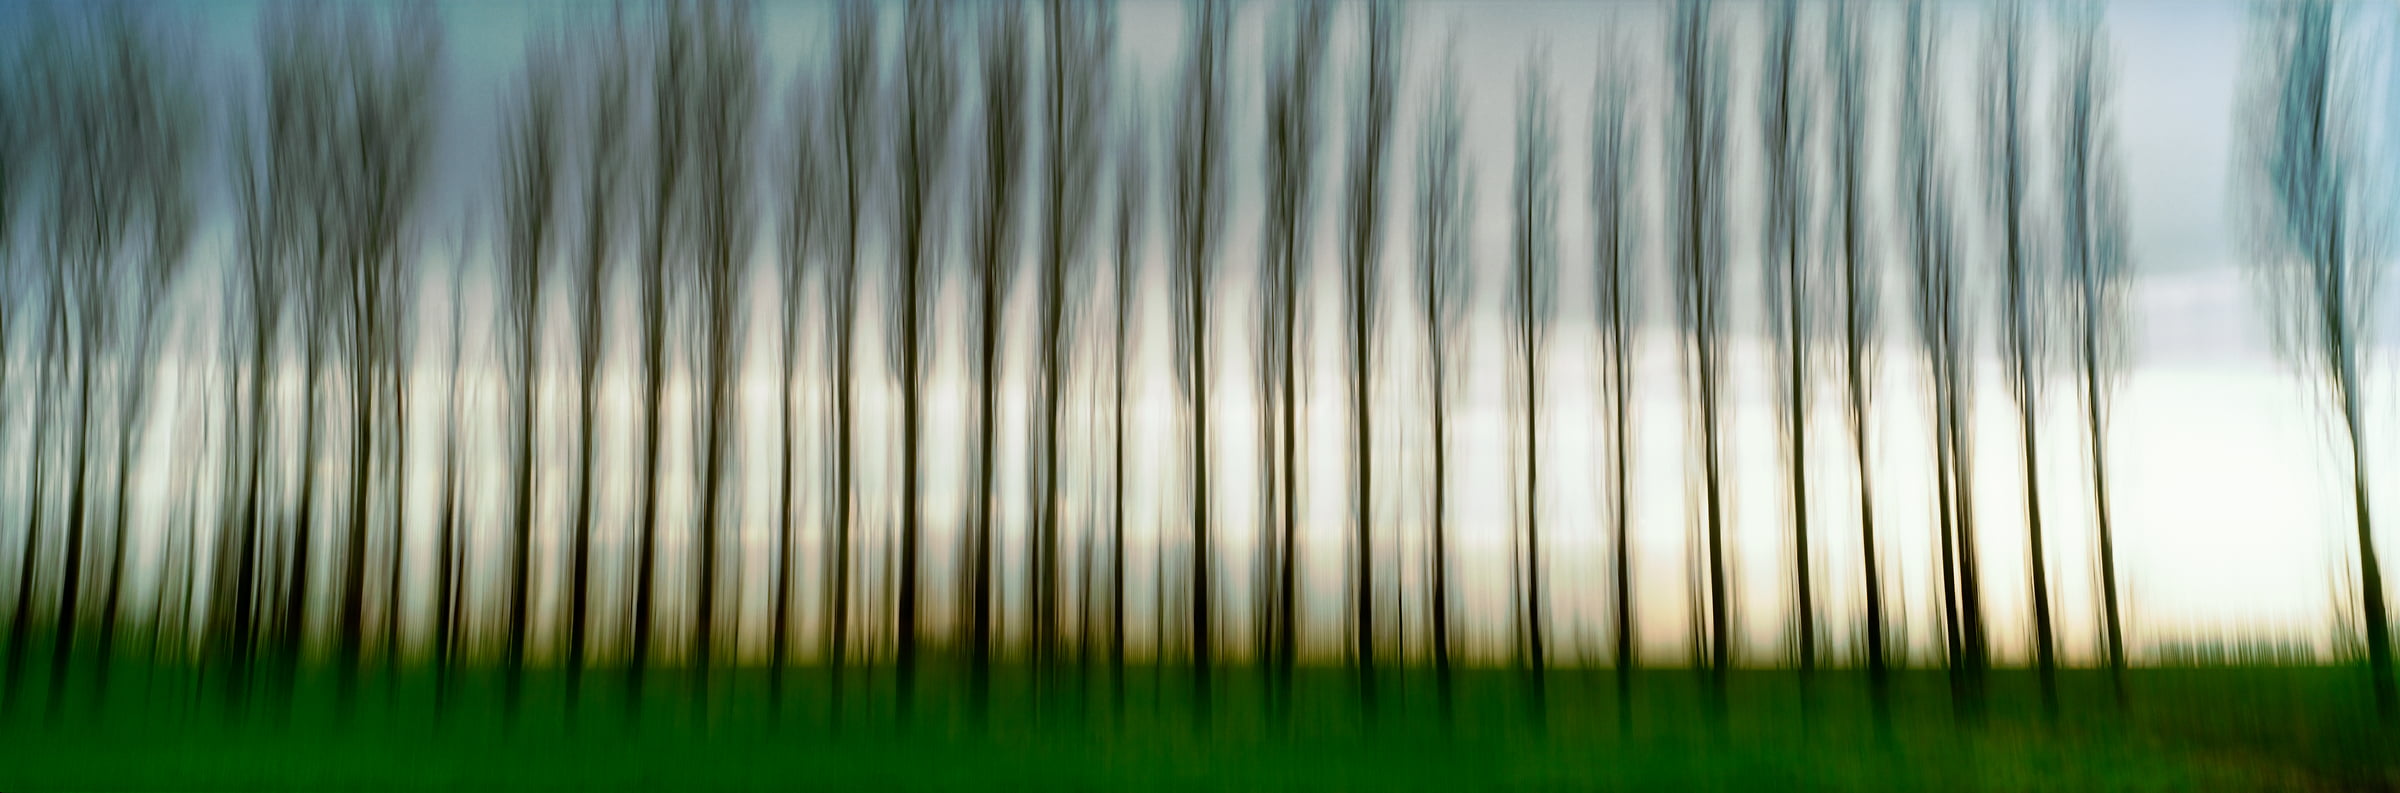 333 megapixels! A very high resolution, large-format, fine art photo print of trees; abstract photograph created by Scott Dimond in Wheatland County, Alberta, Canada